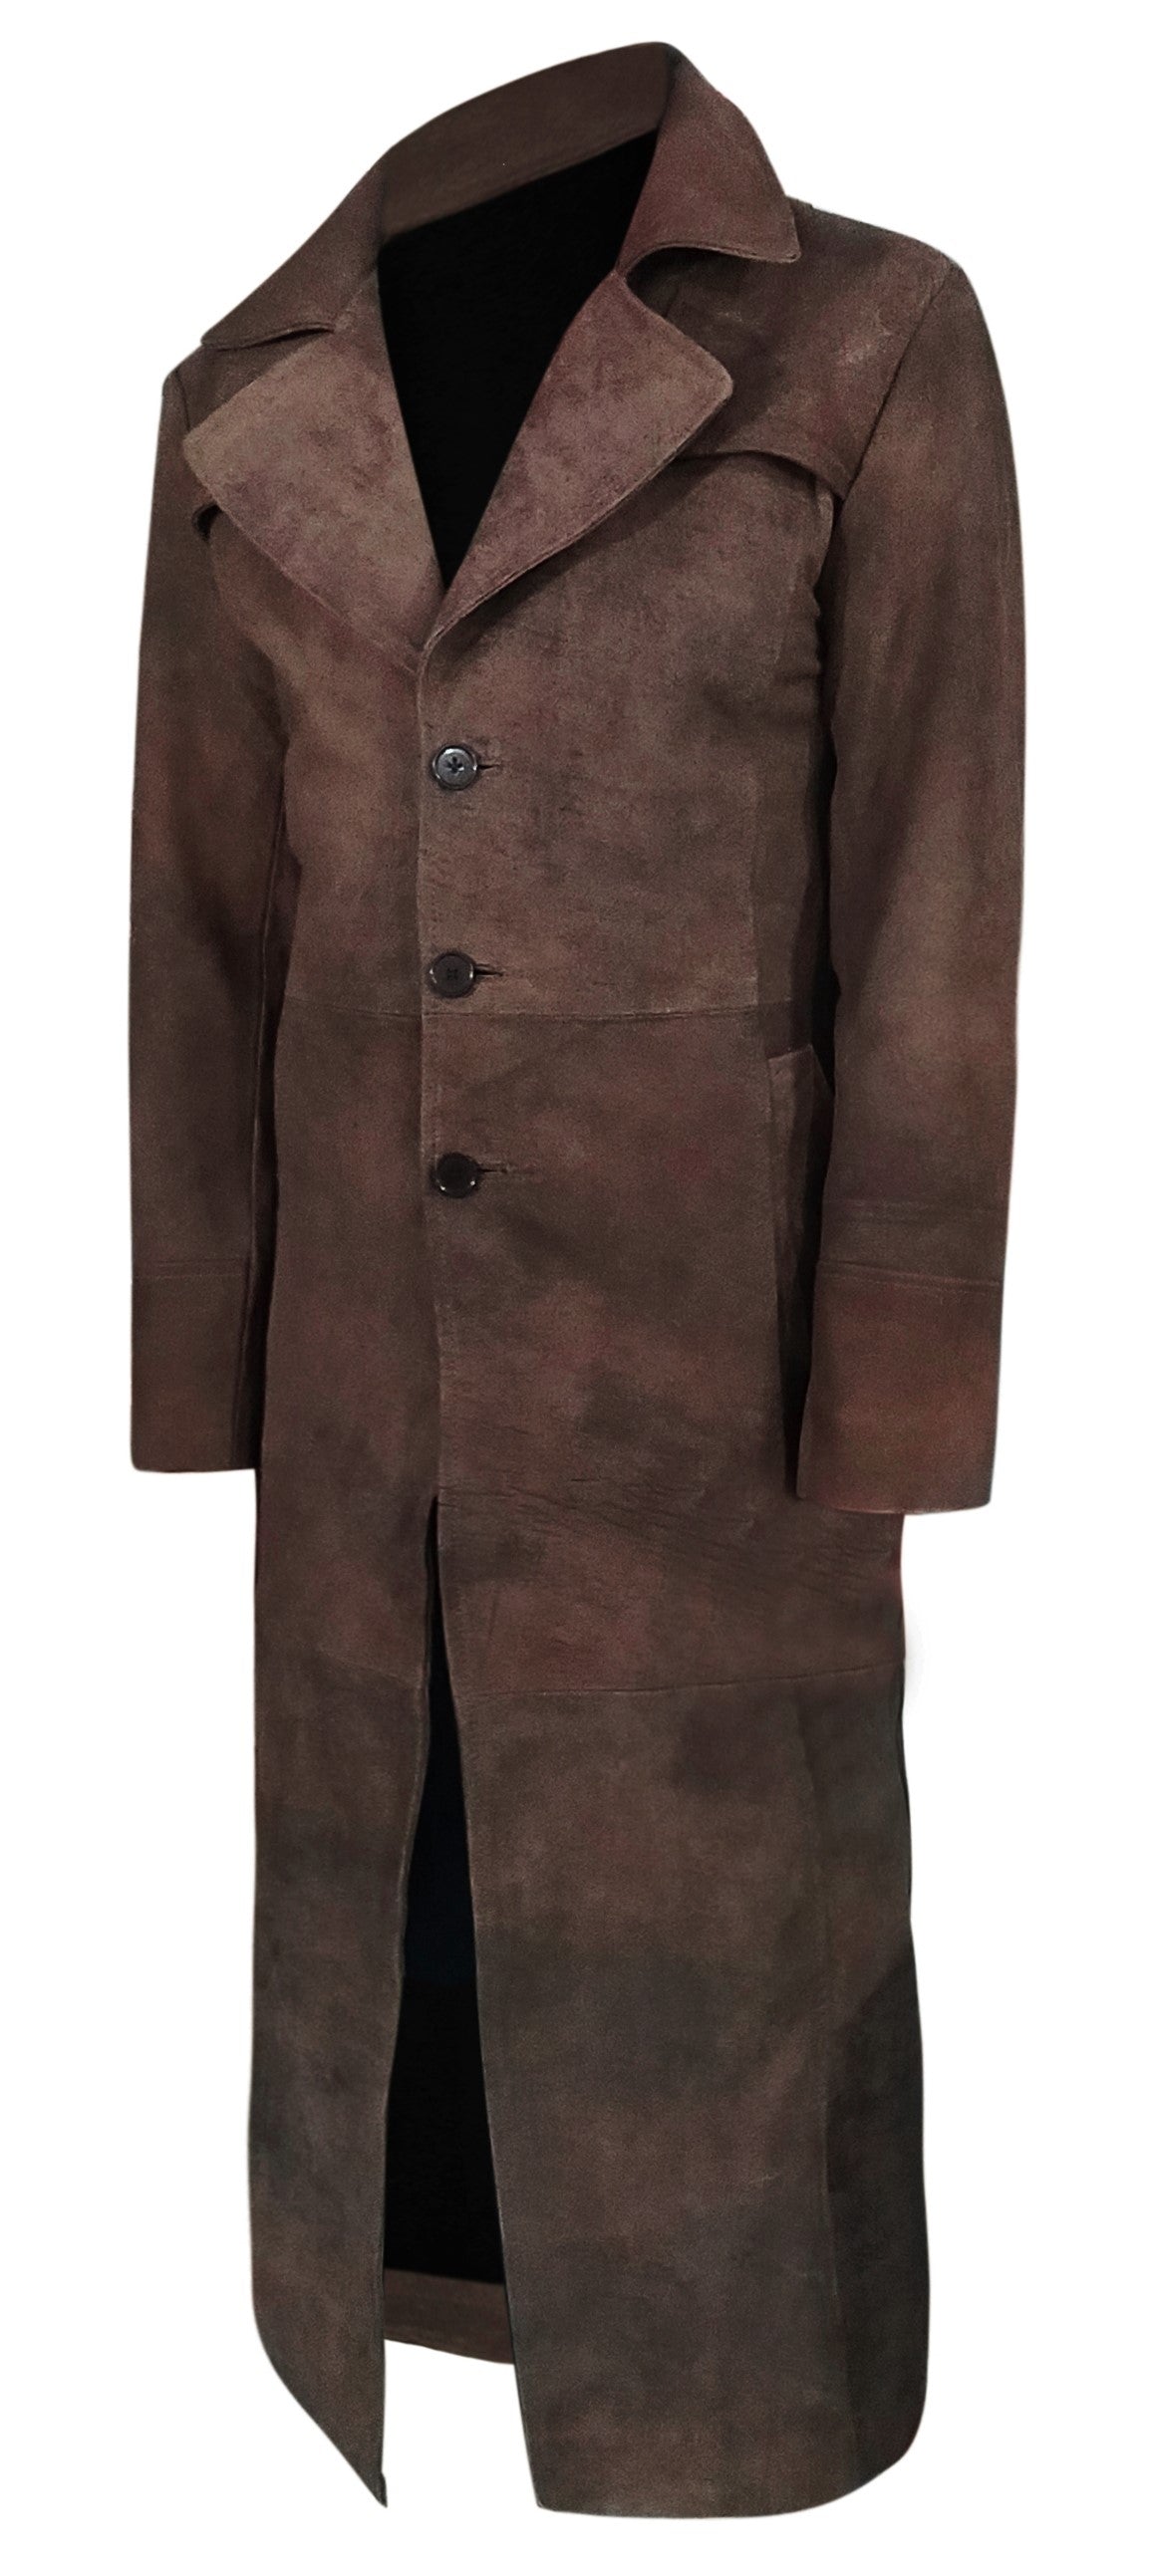 Mens Leather Black Winter Trench Coat